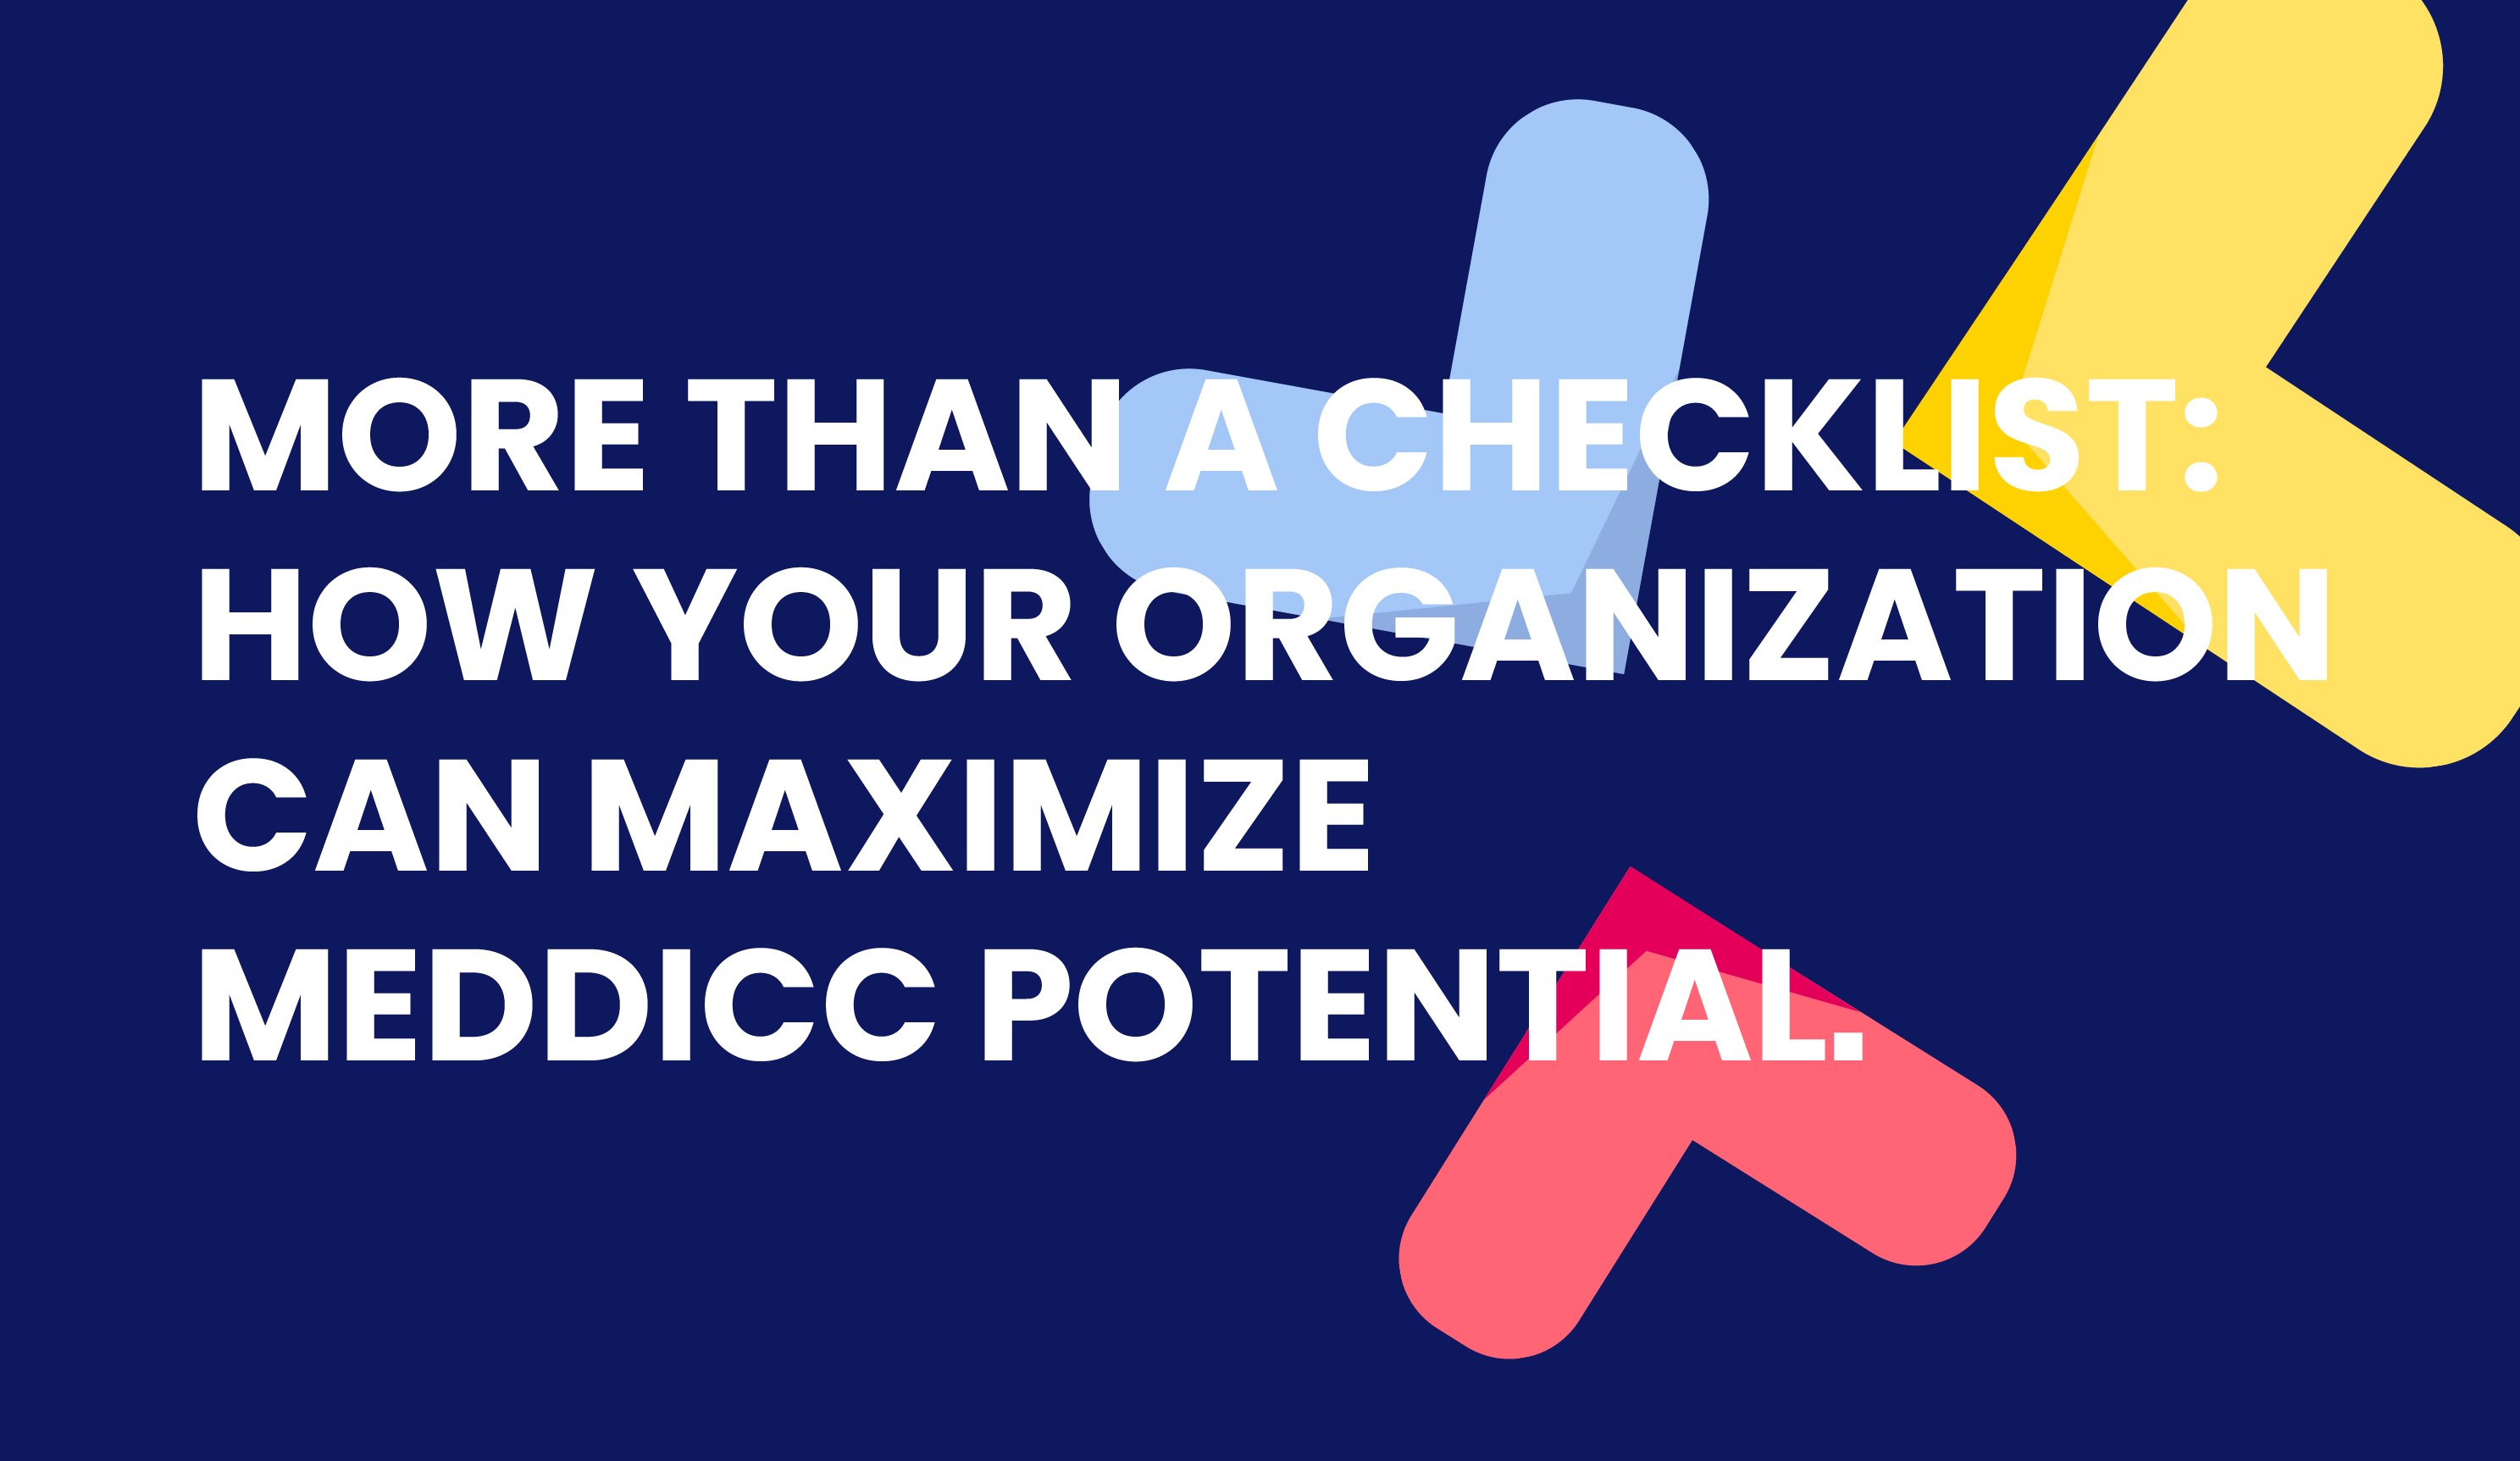 More Than a Checklist: How Your Organization Can Maximize MEDDPICC Potential